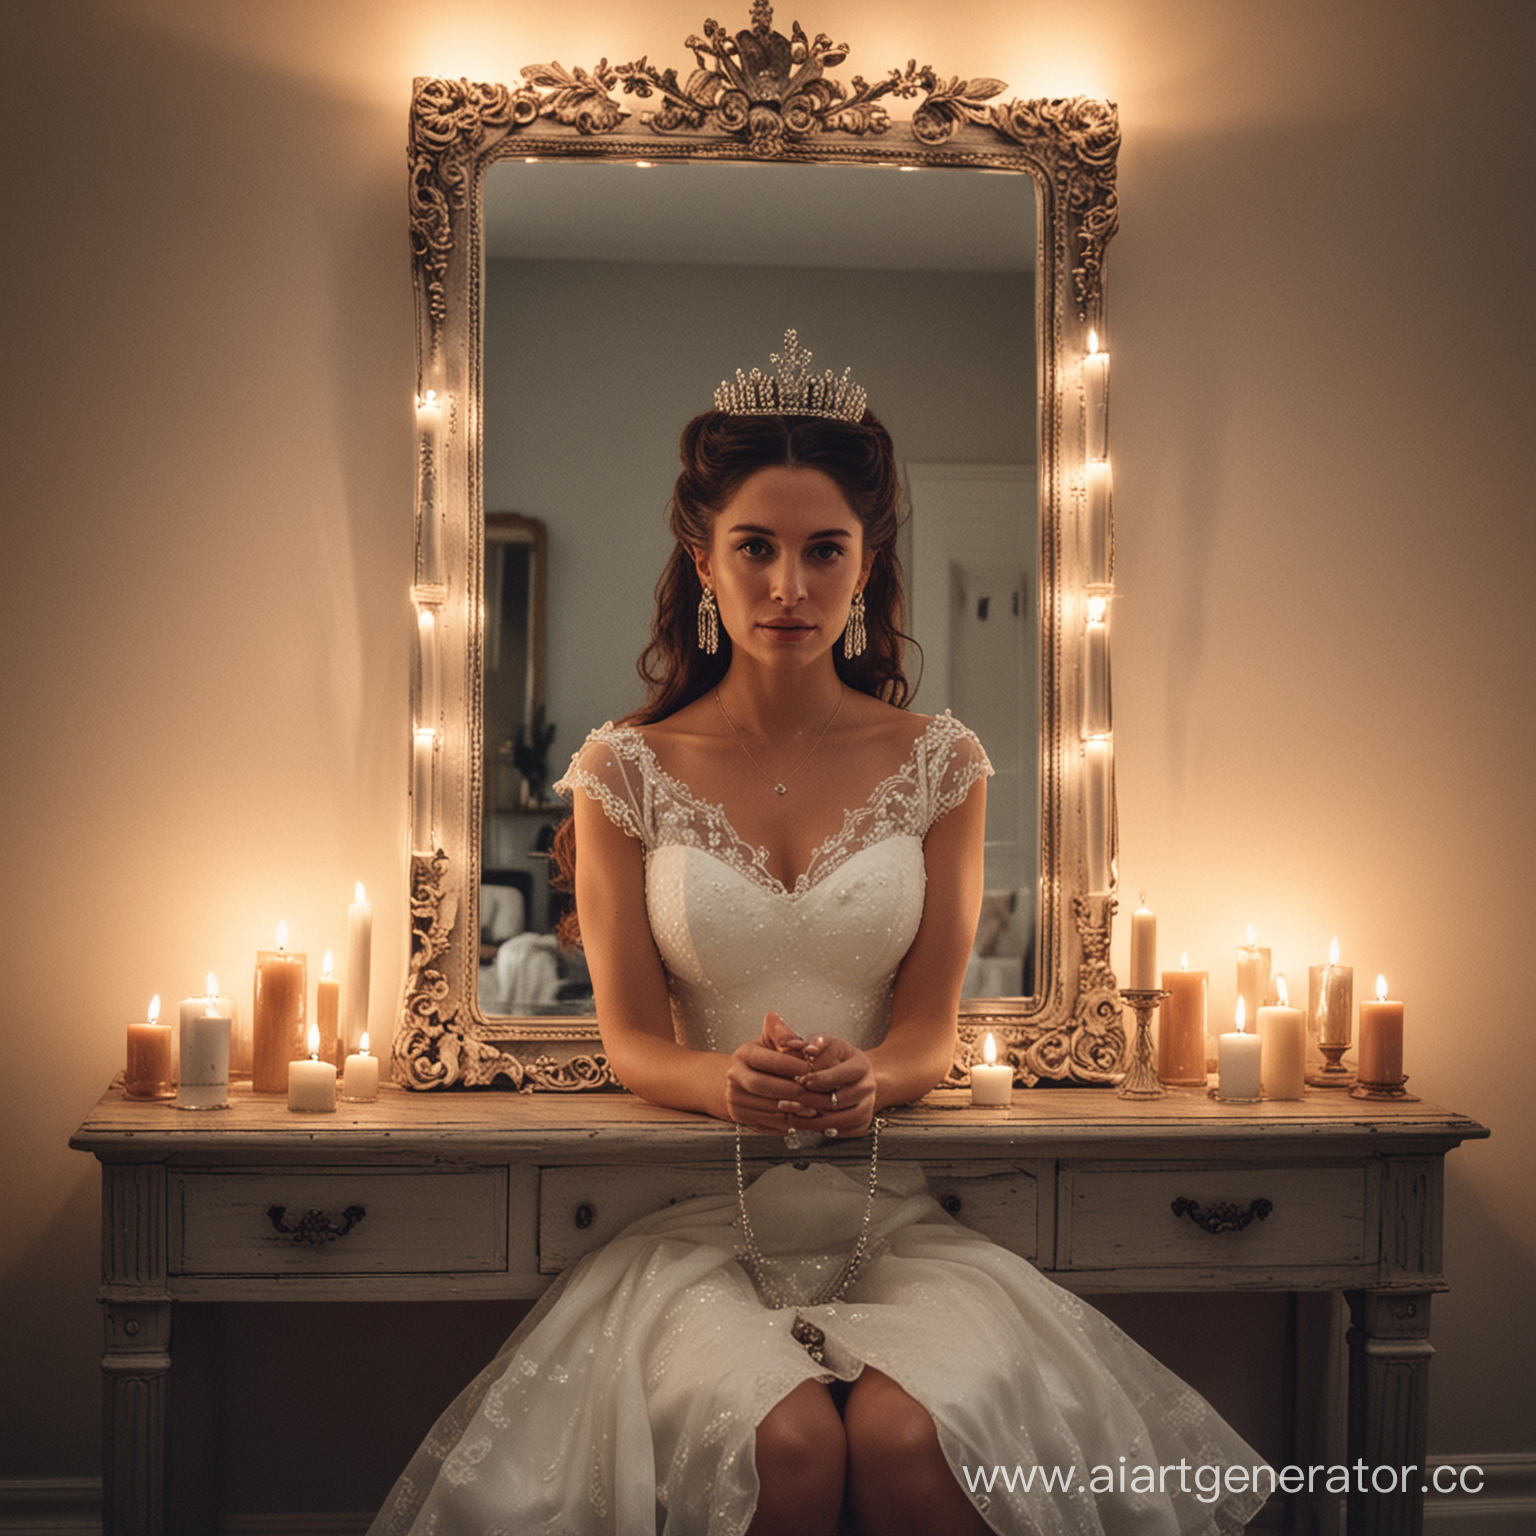 Queen sitting in front of mirror with candles